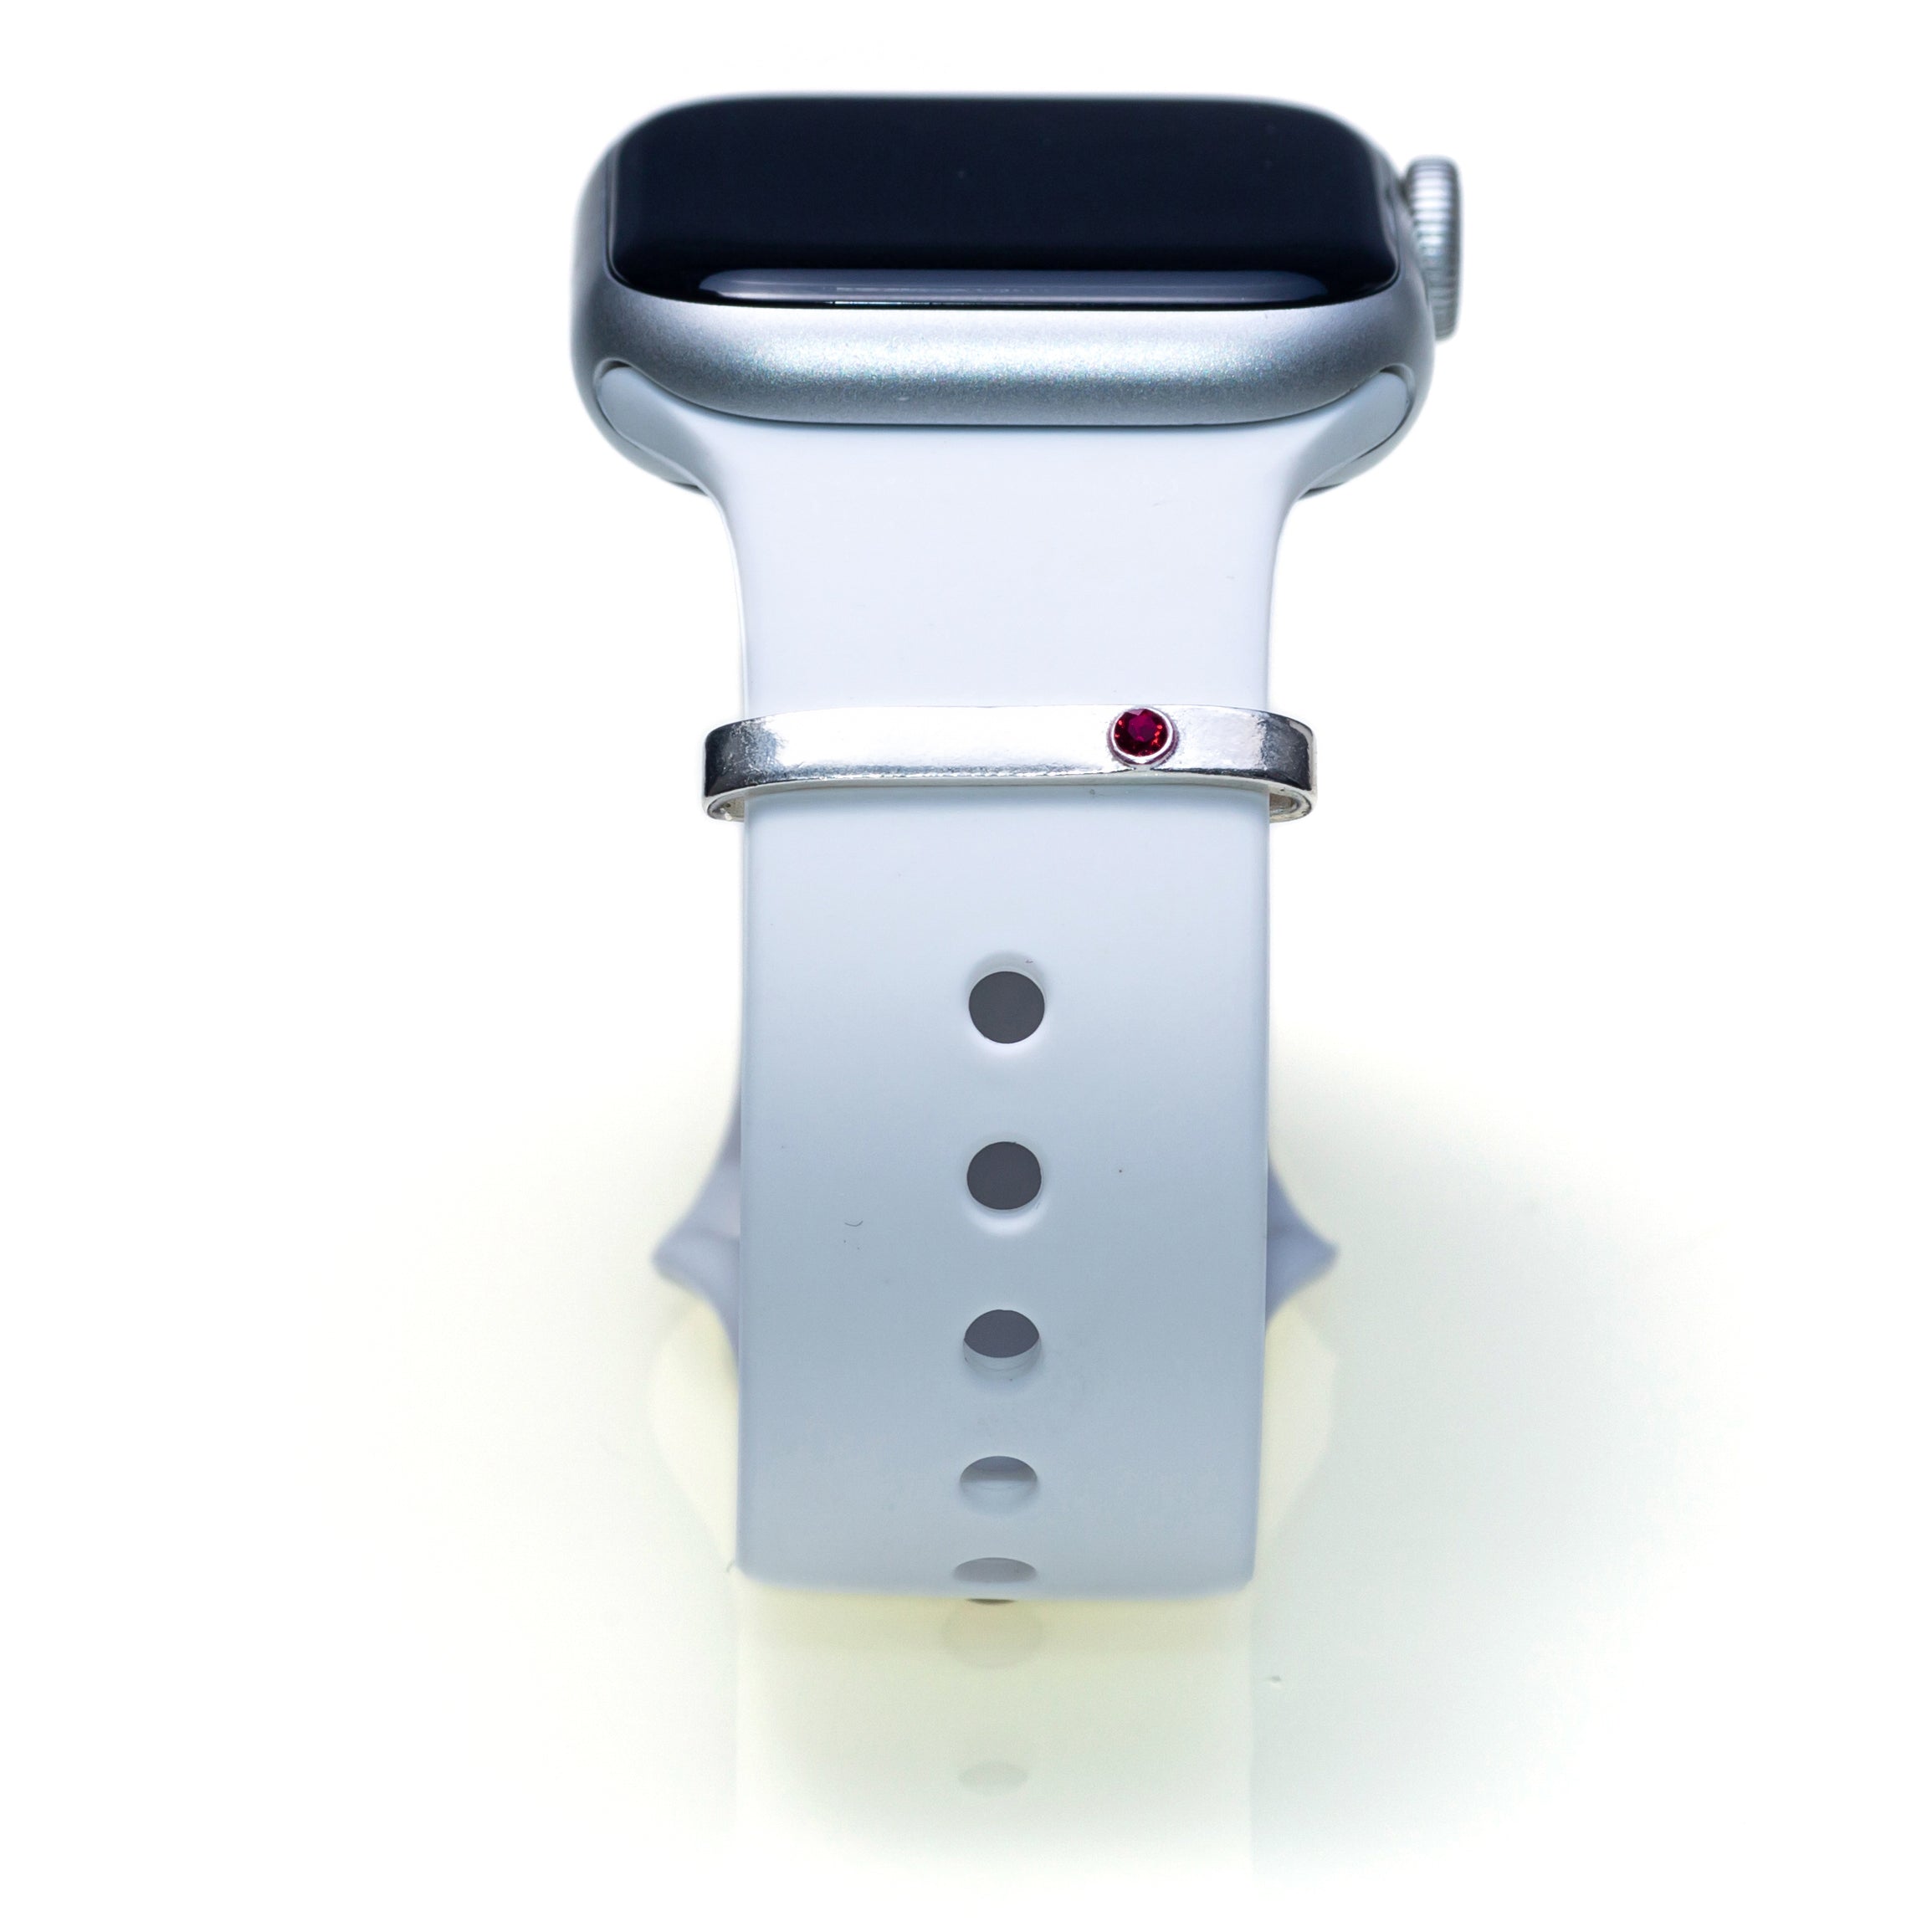 Customizable Plate with Swarovski Ring Accessory for Apple Watch Band